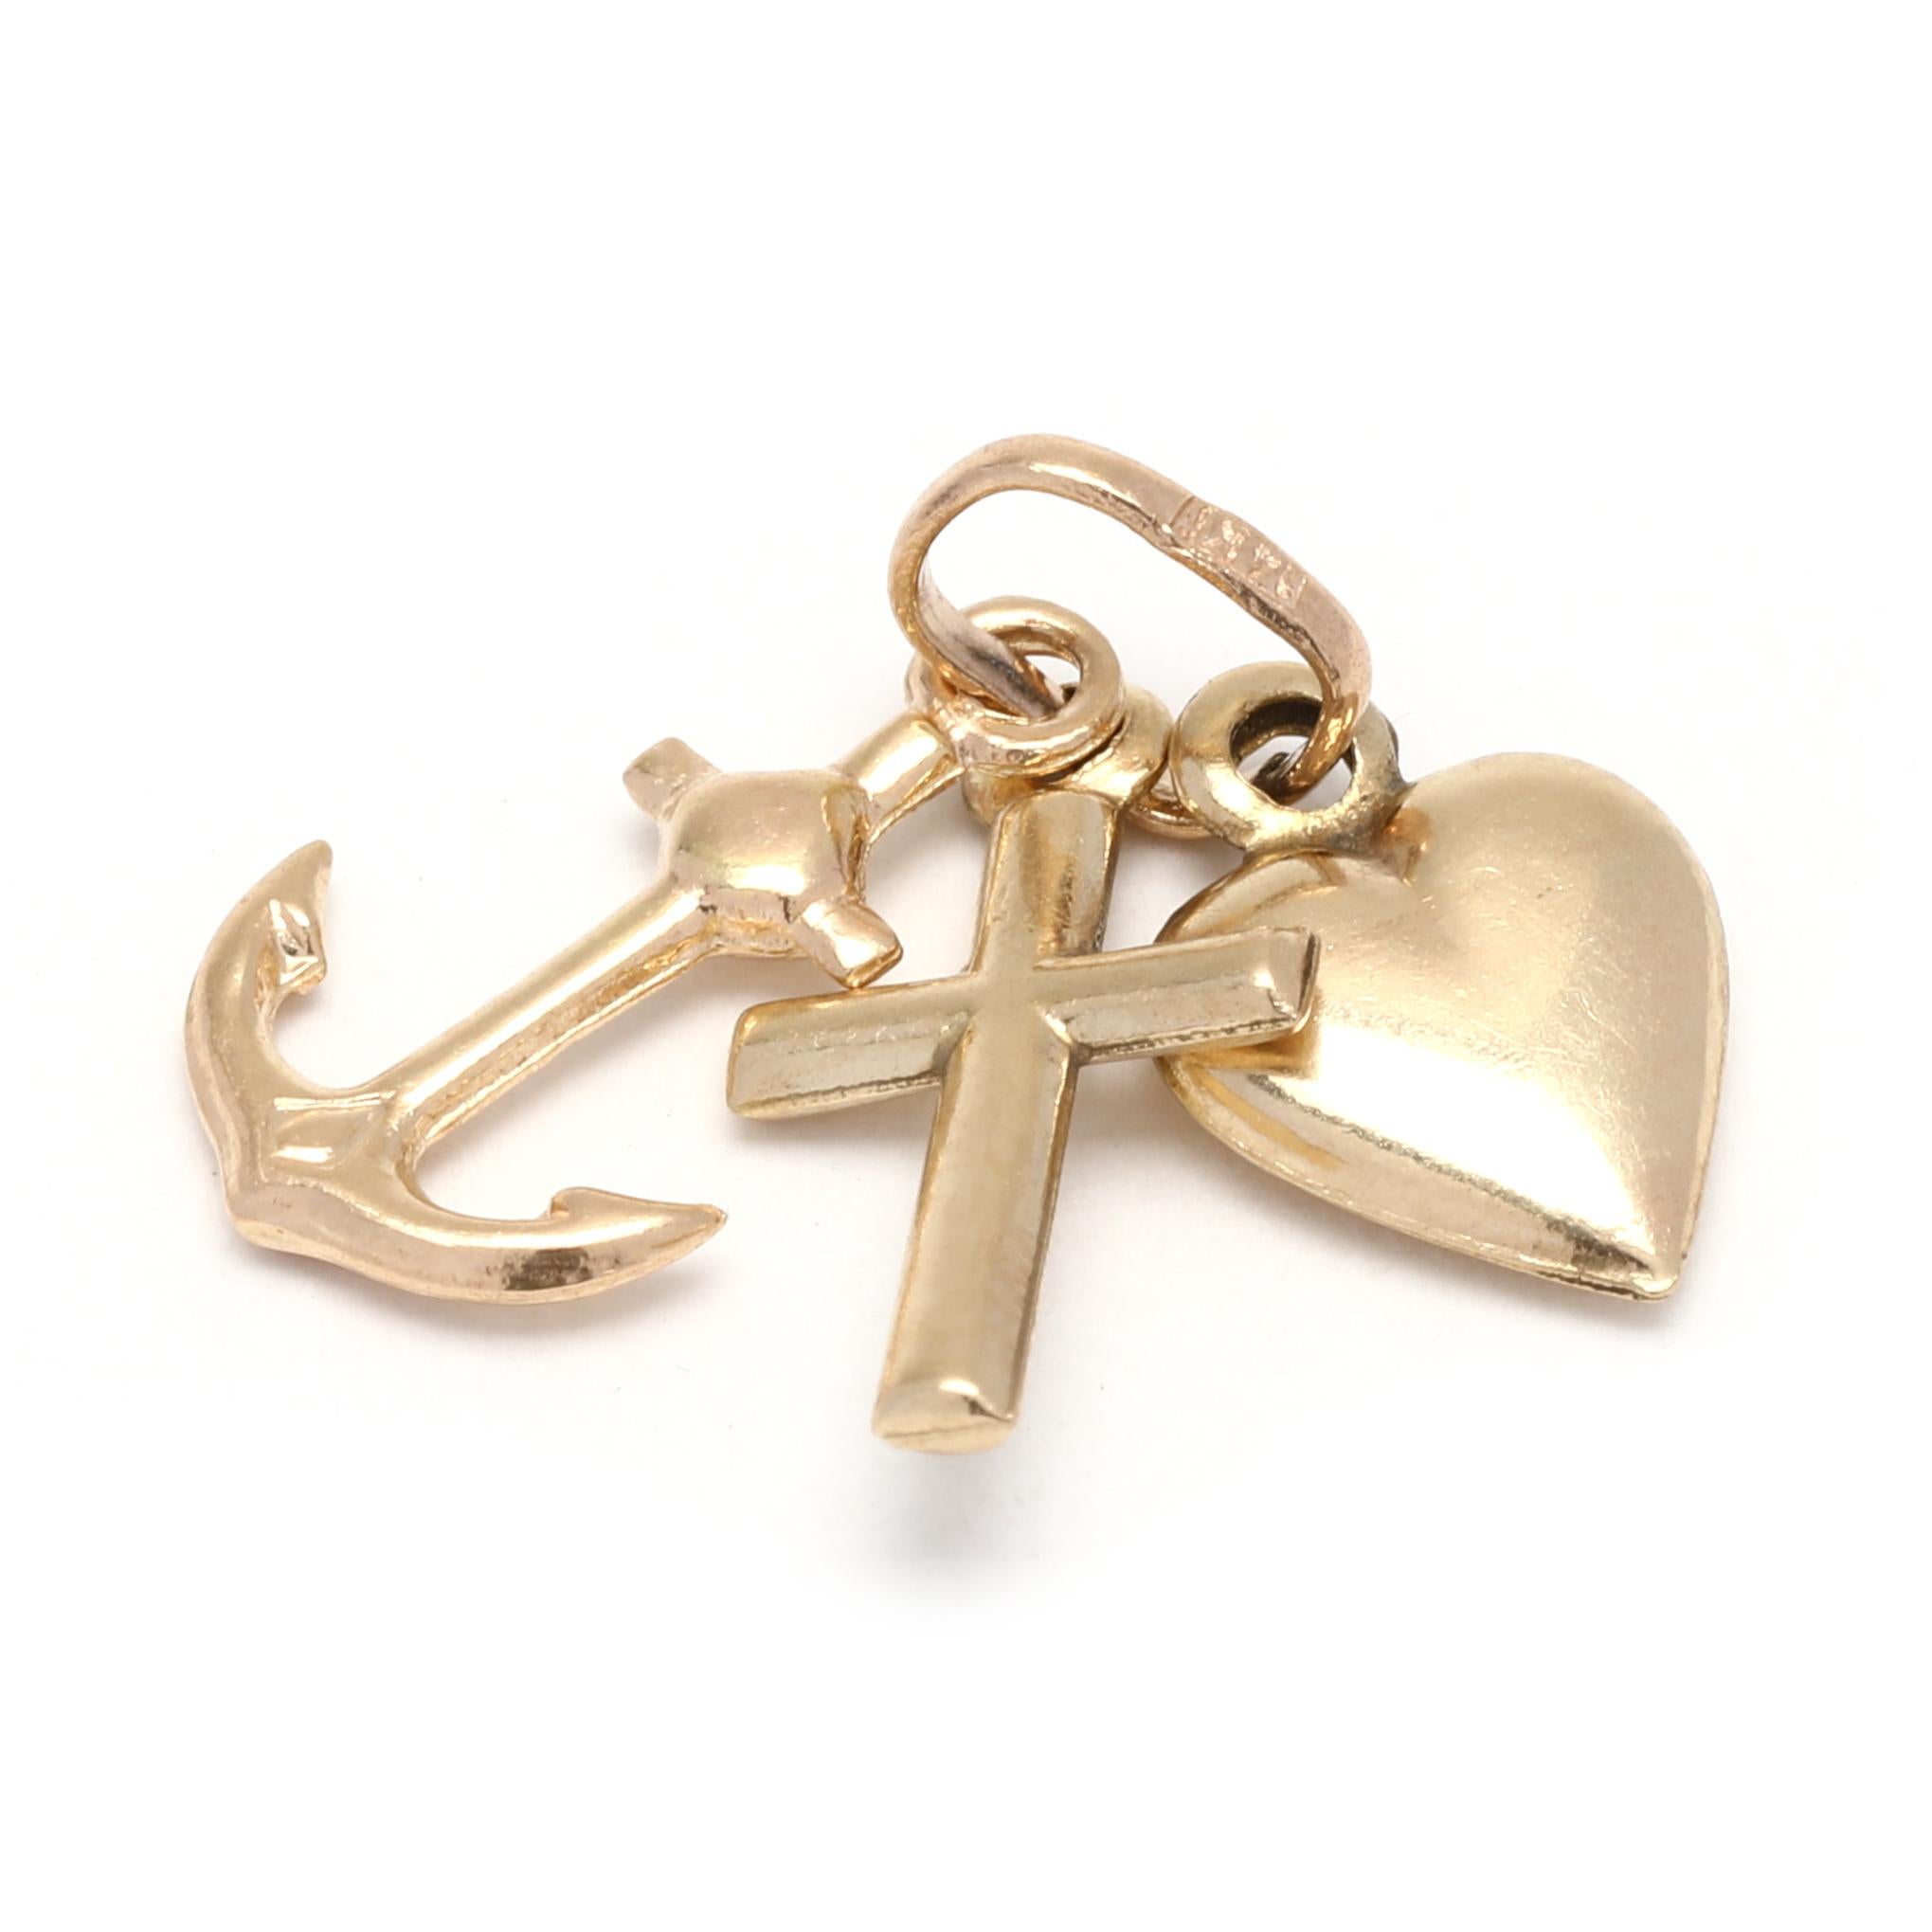 This small 14K yellow gold love, faith, and hope charm is perfect for adding a meaningful touch to any jewelry piece. The charm features an anchor, heart, and cross, symbolizing the three elements of love, faith, and hope. Measuring 5/8 inch in